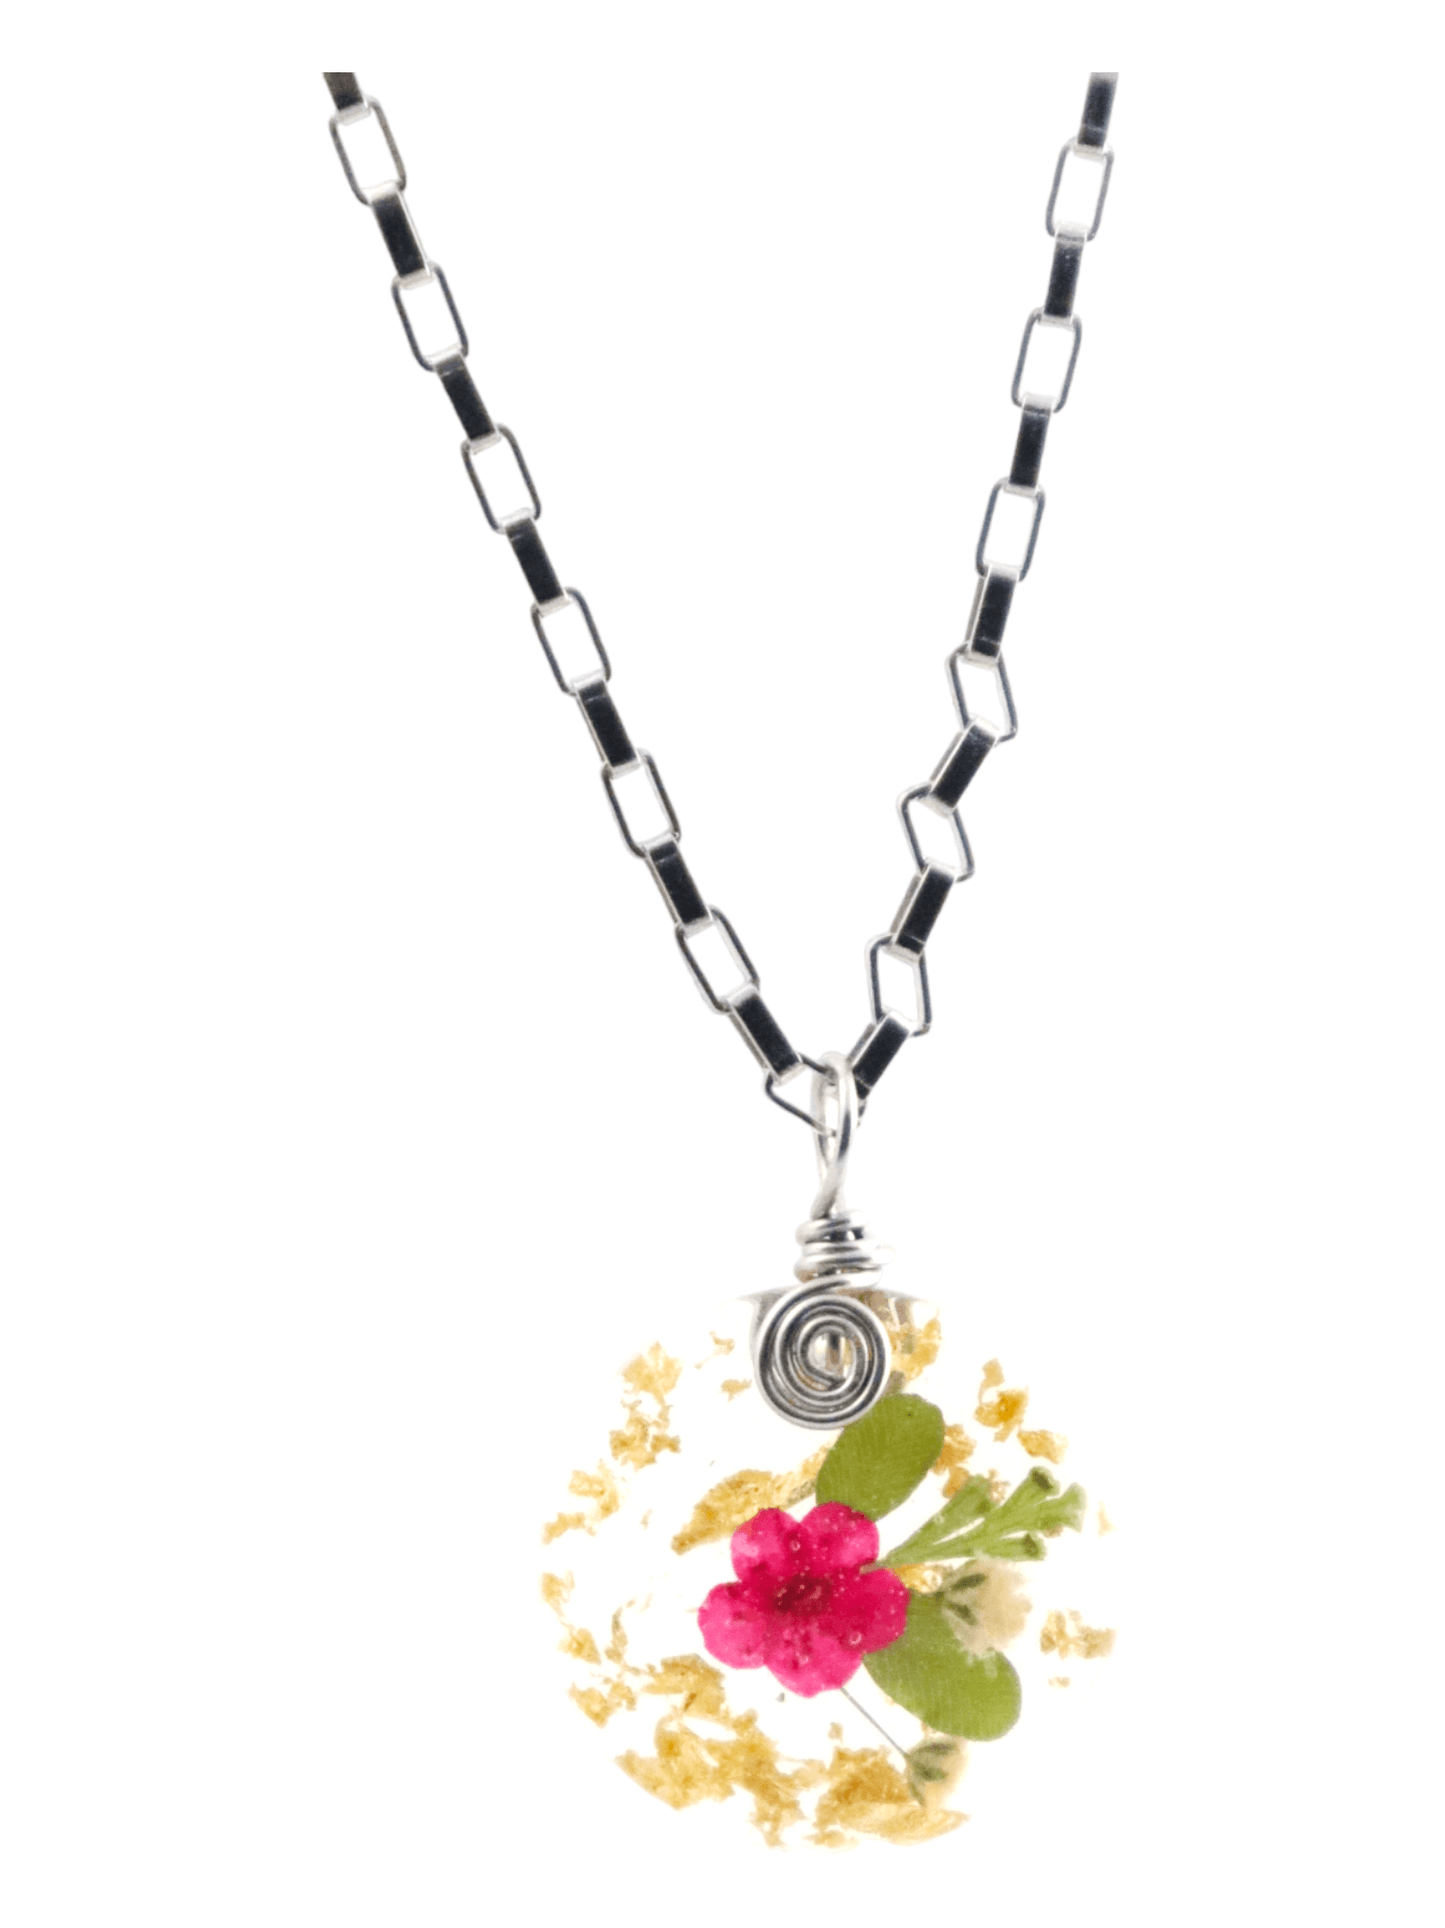 ircle-Resin-Pendants-With-Real-Flowers-Gold-Flakes-Stainless-Steel-Chains-Kaleidoscopes-And-Polka-Dots